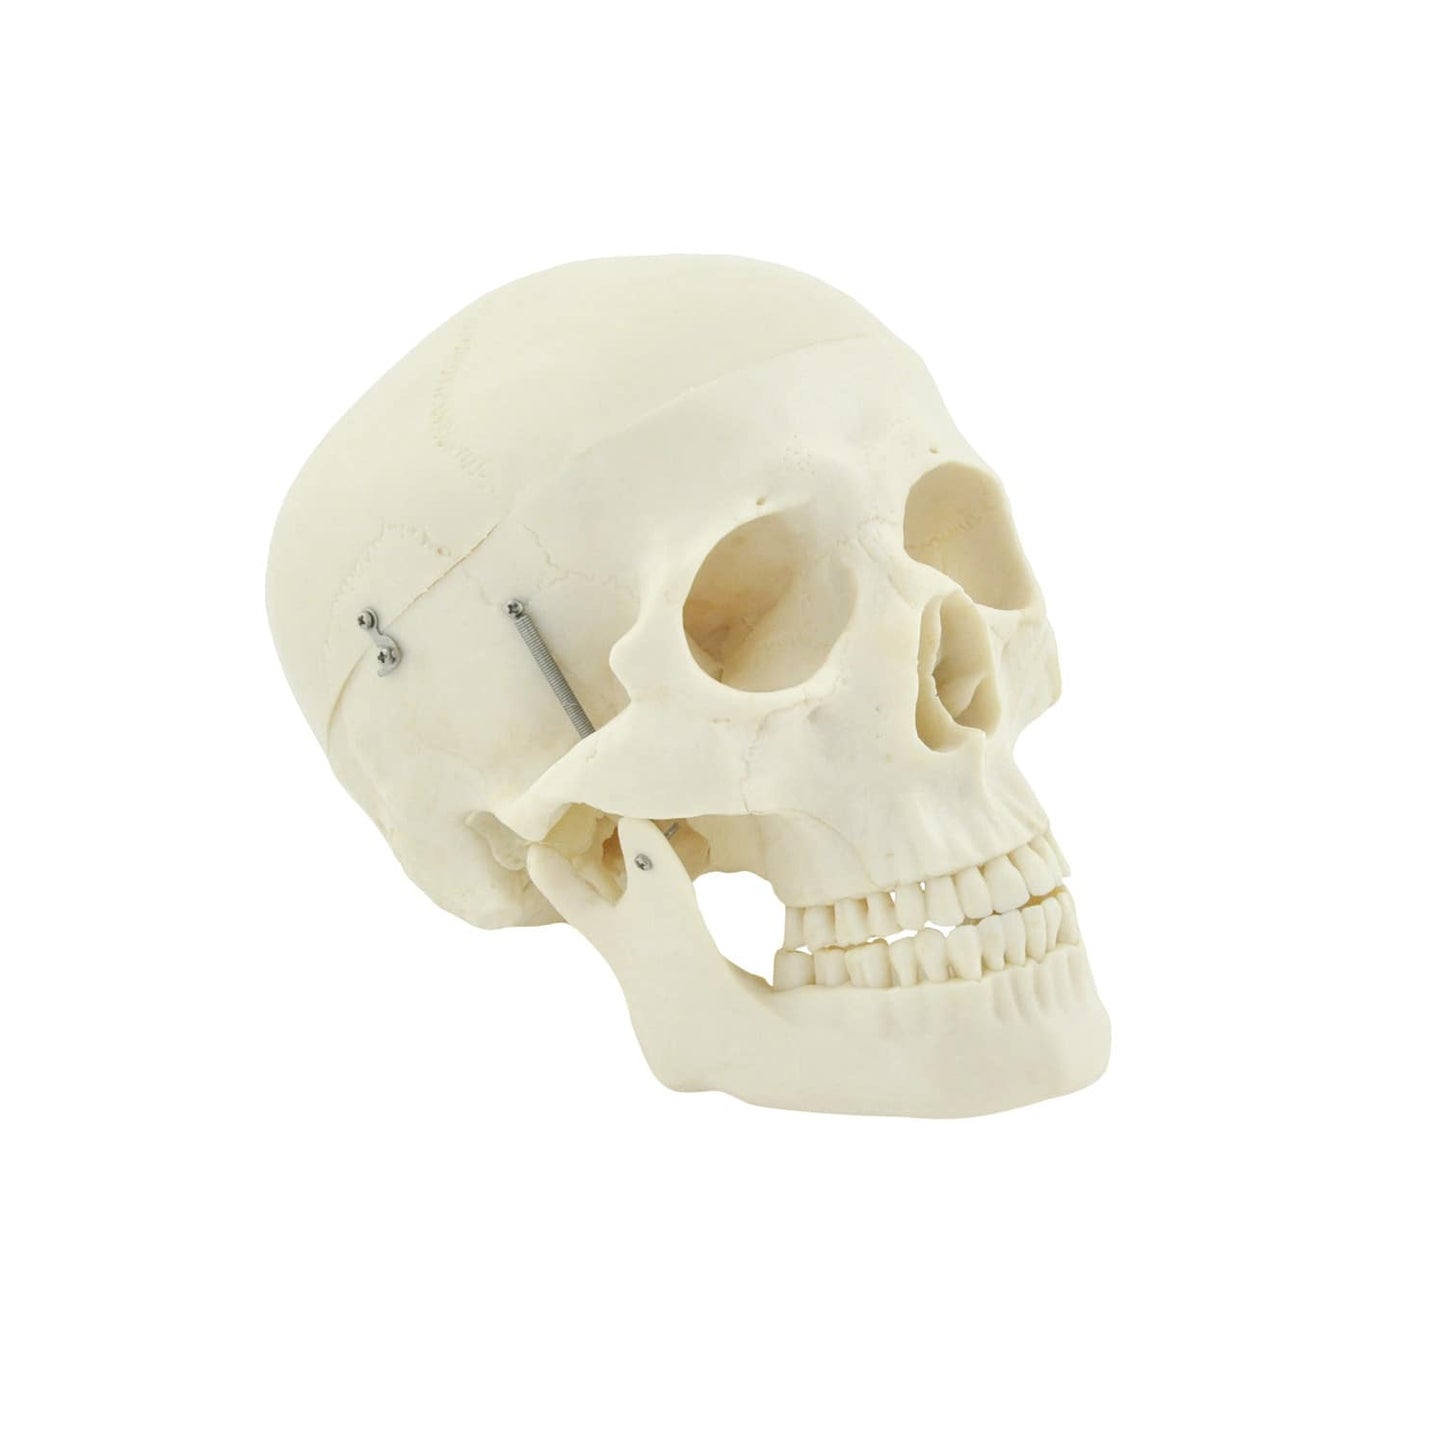 Skull Model Made Of Sturdy Plastic With Movable Jaw